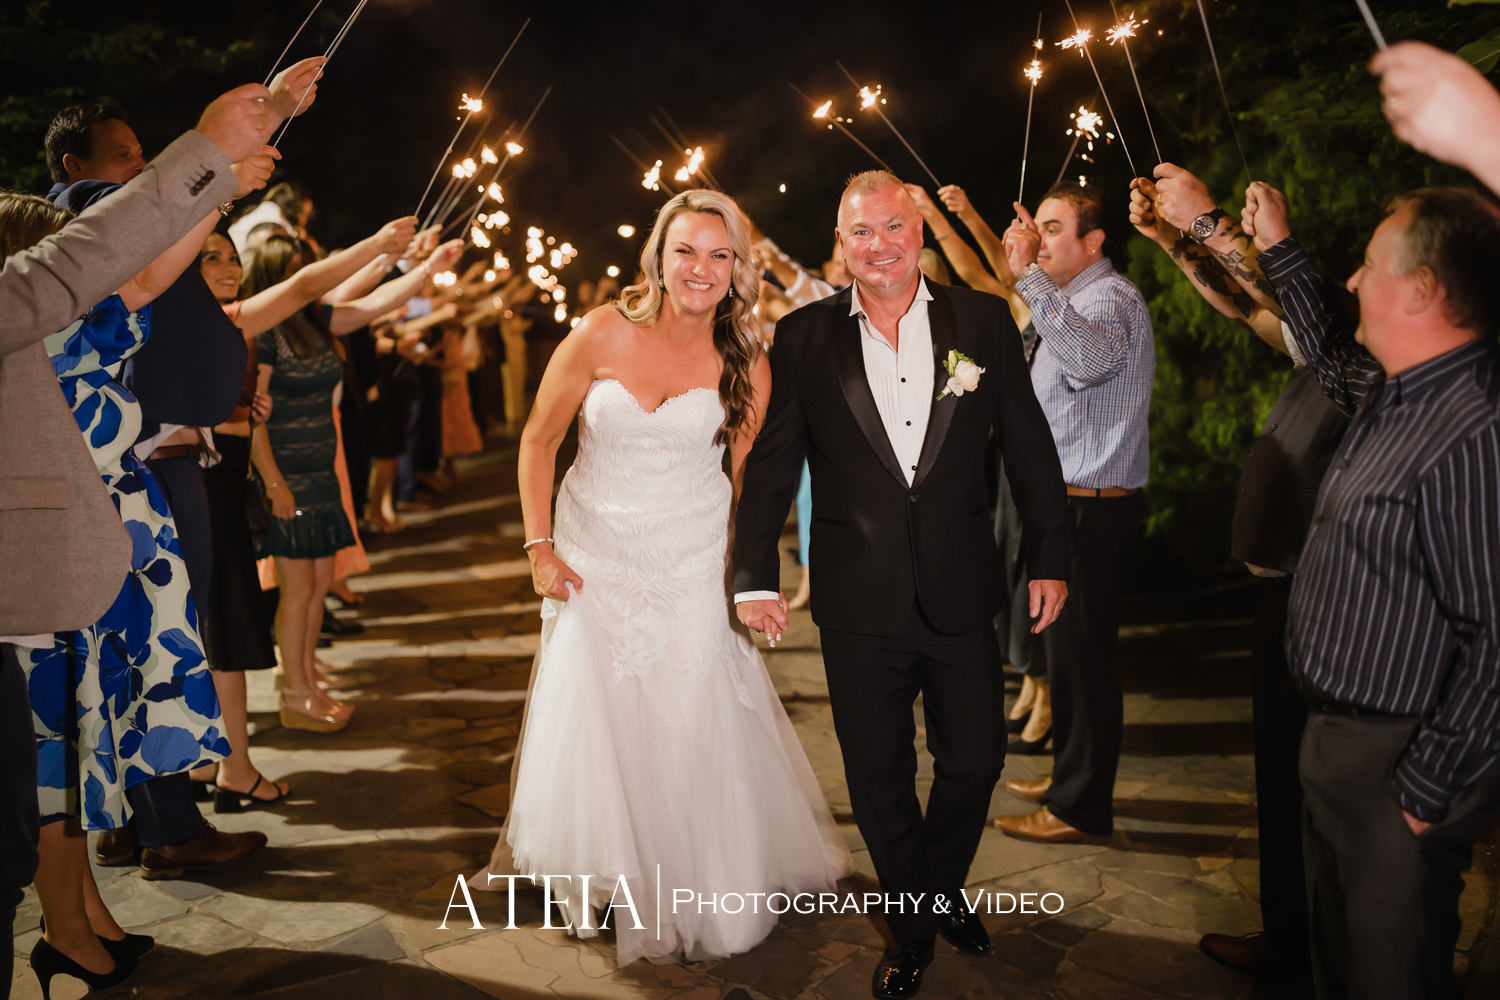 , Nicole and Tony&#8217;s wedding photography at Tatra Receptions captured by ATEIA Photography &#038; Video